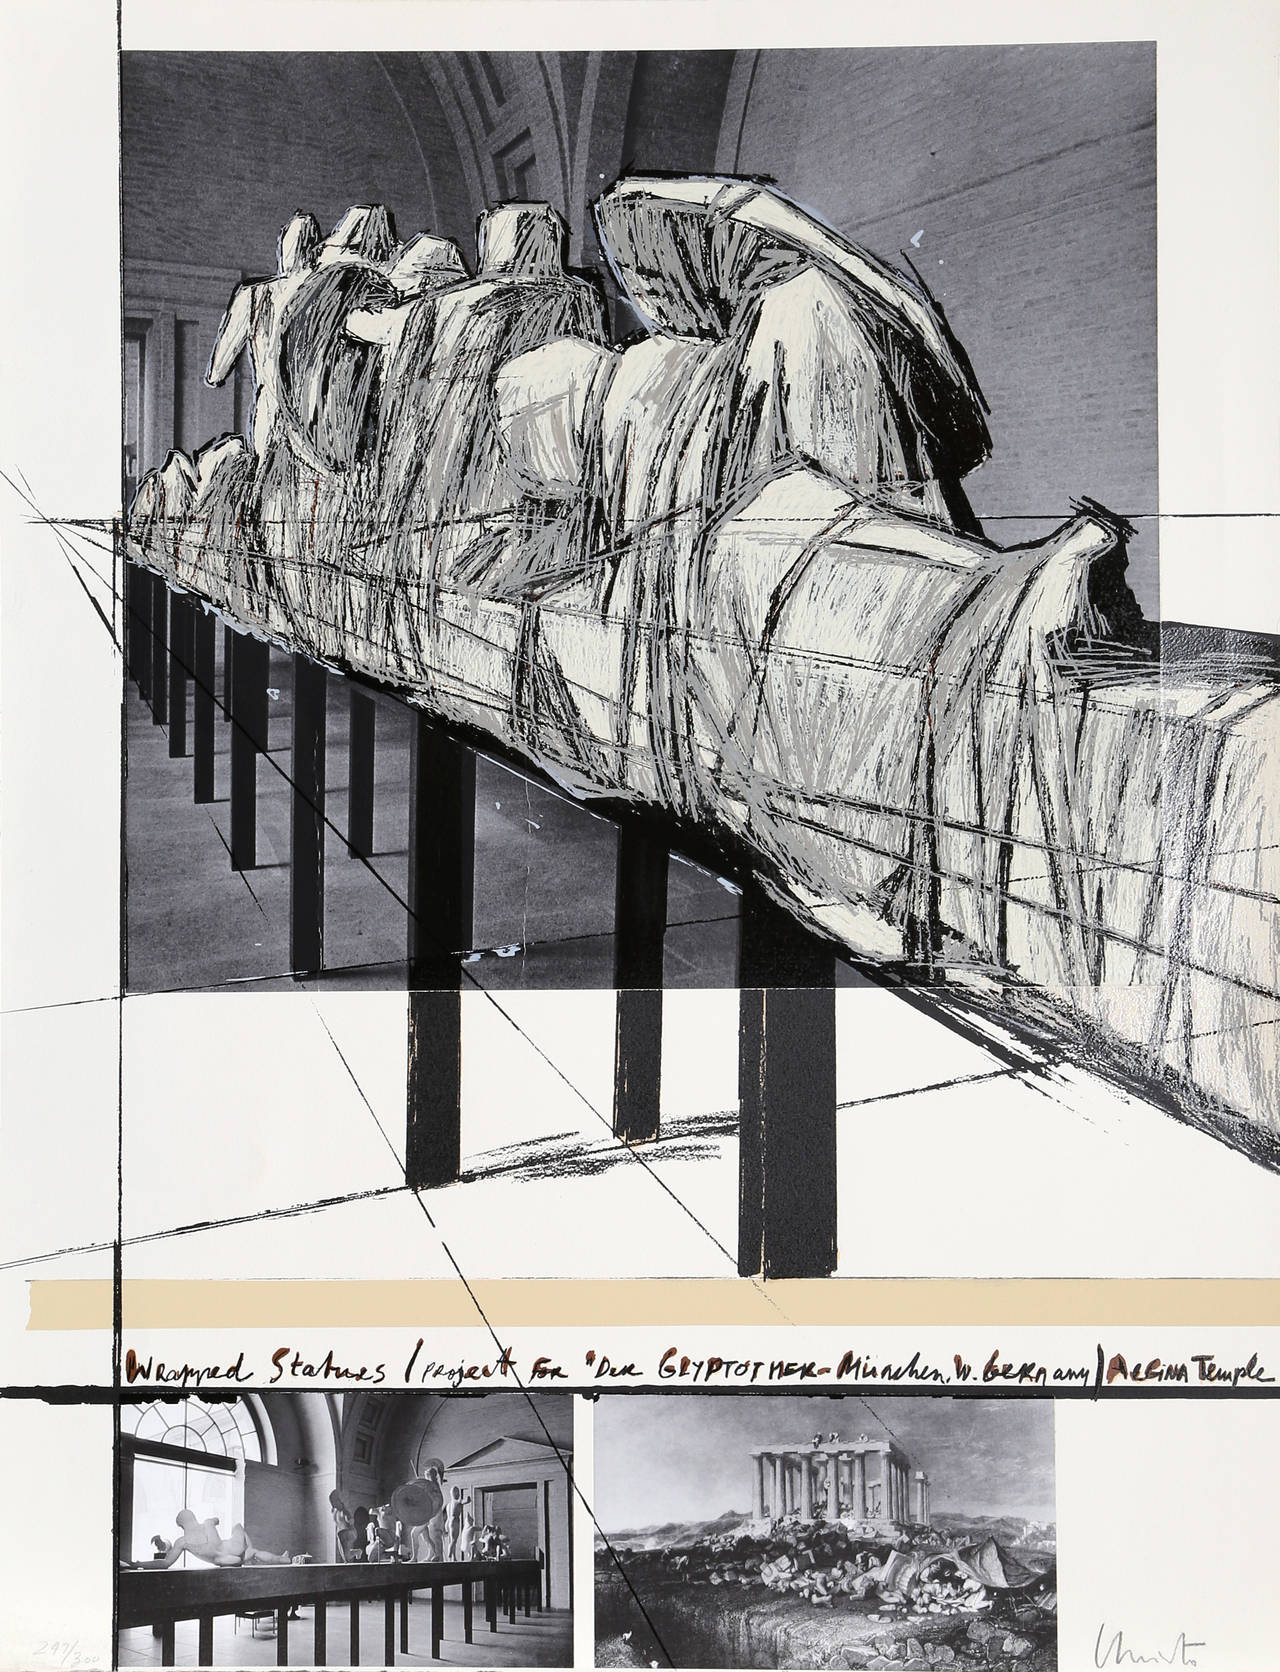 Christo and Jeanne-Claude Landscape Print - Christo, Wrapped Statues: The Glyptothek, Munich, Silkscreen and Collage